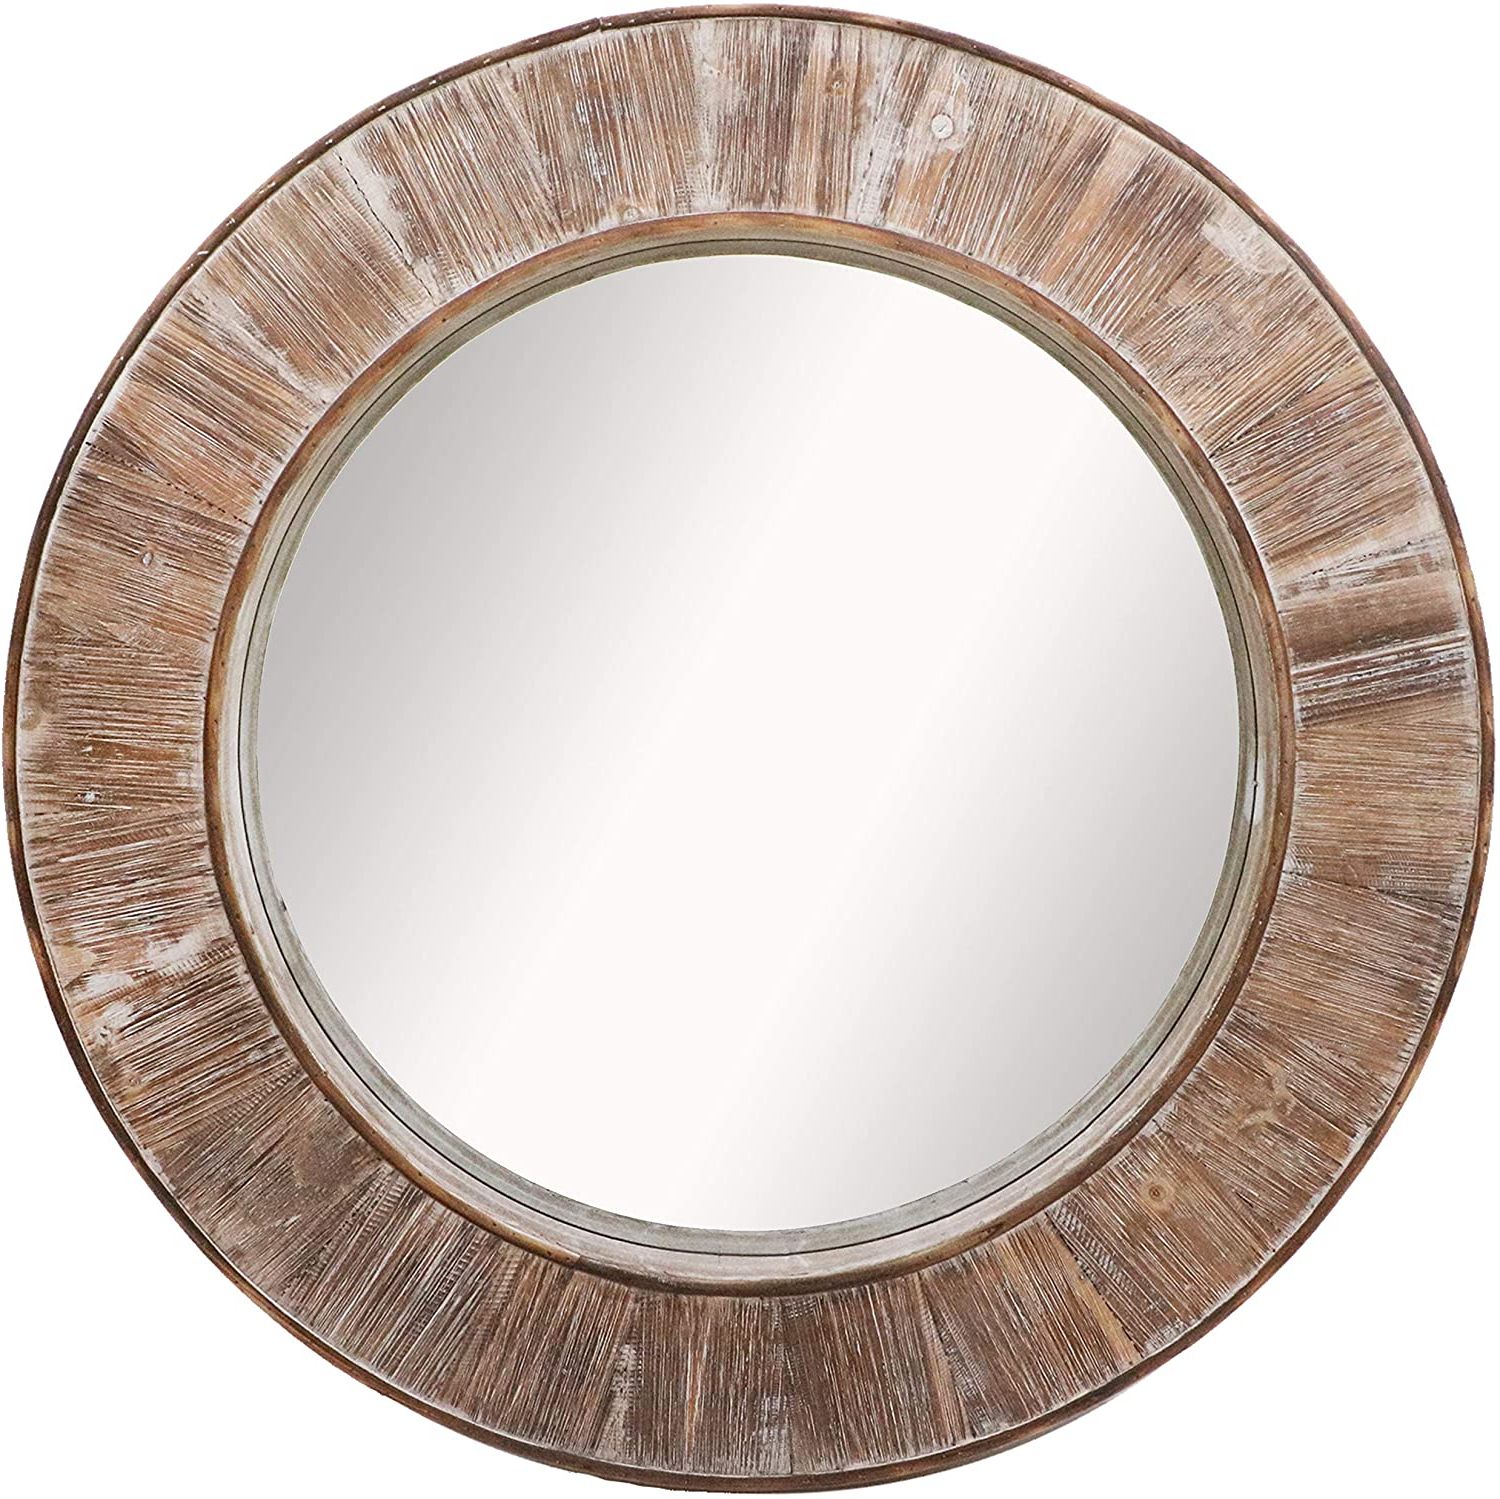 Organic Natural Wood Round Wall Mirrors Throughout Most Popular Barnyard Designs Round Decorative Wall Hanging Mirror Large Wooden (View 11 of 15)